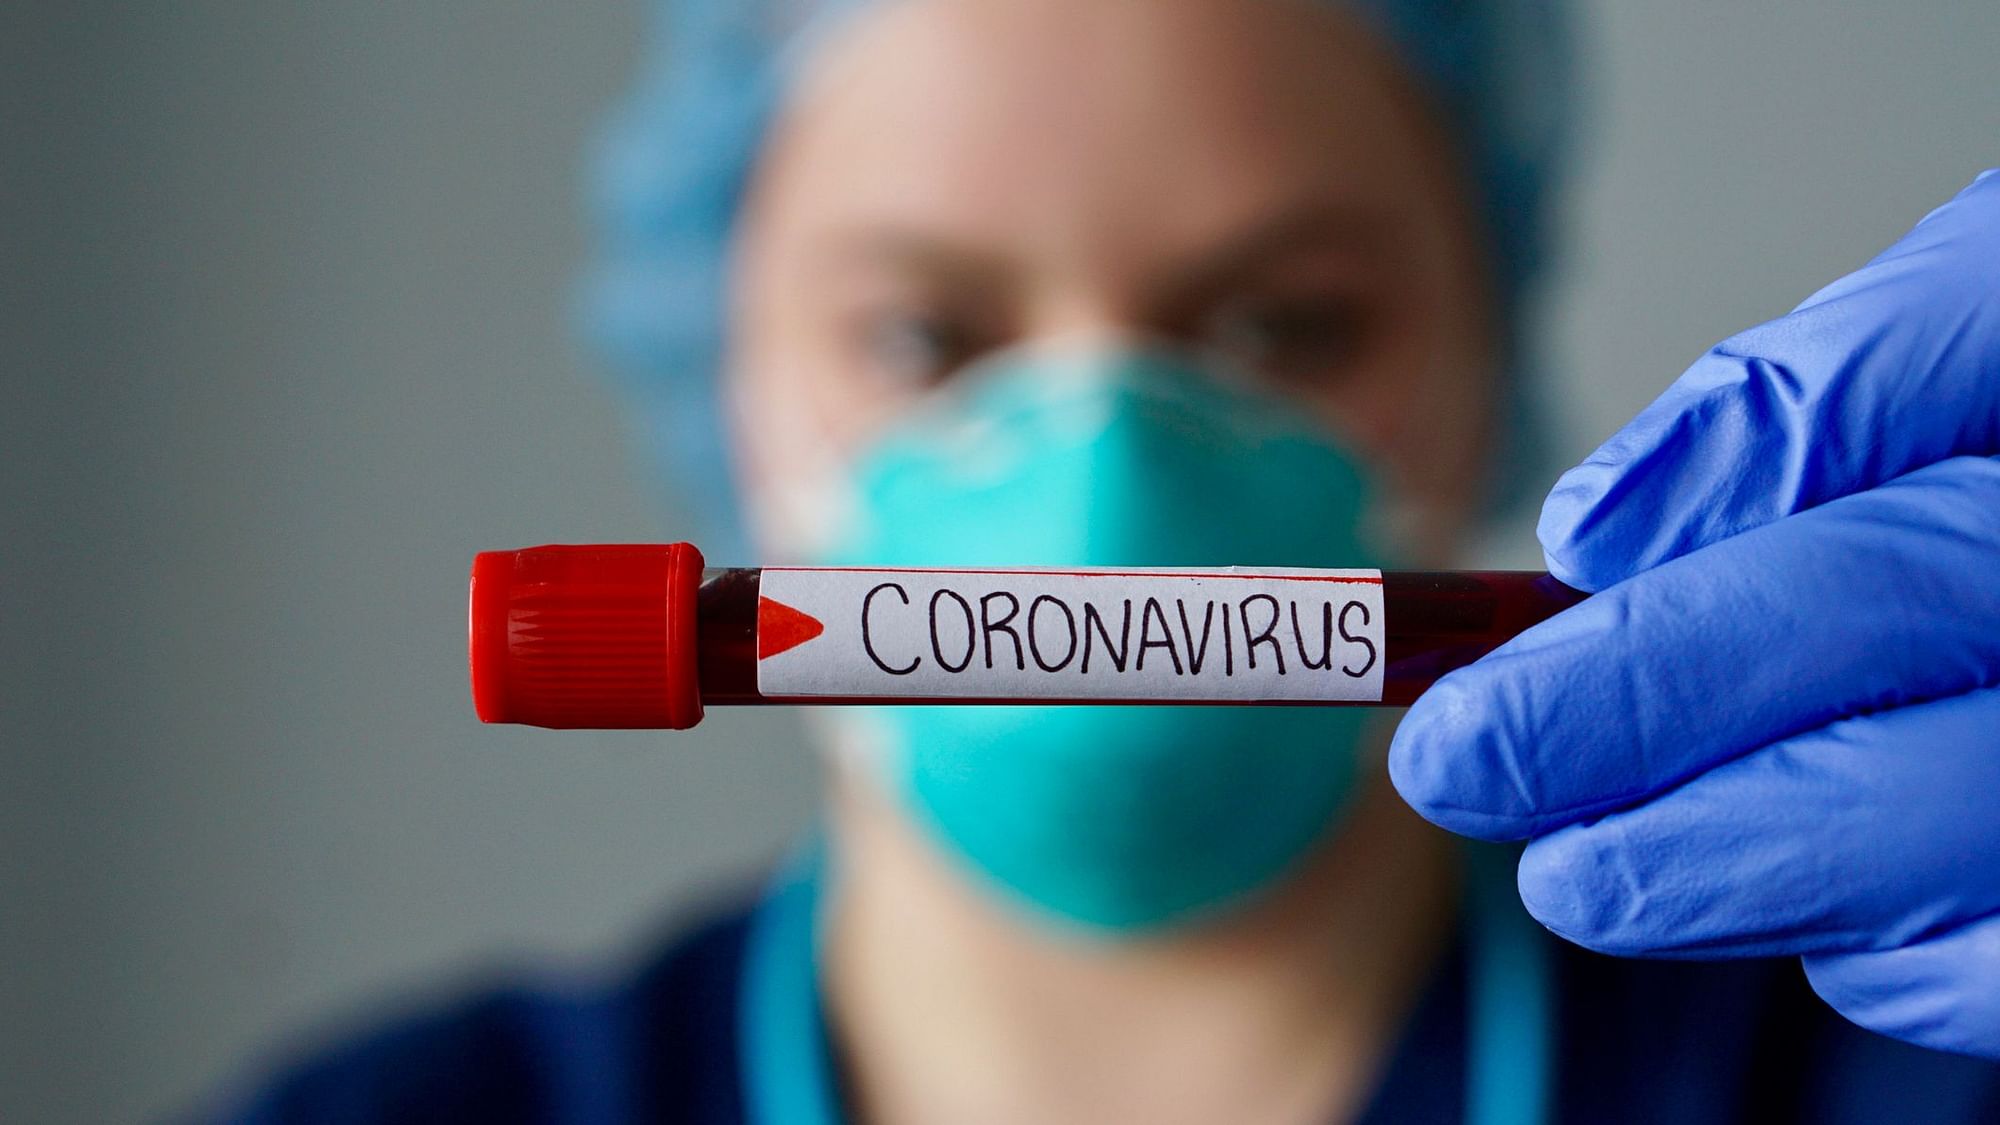 Early results of a COVID-19 vaccine by Oxford scientists are promising